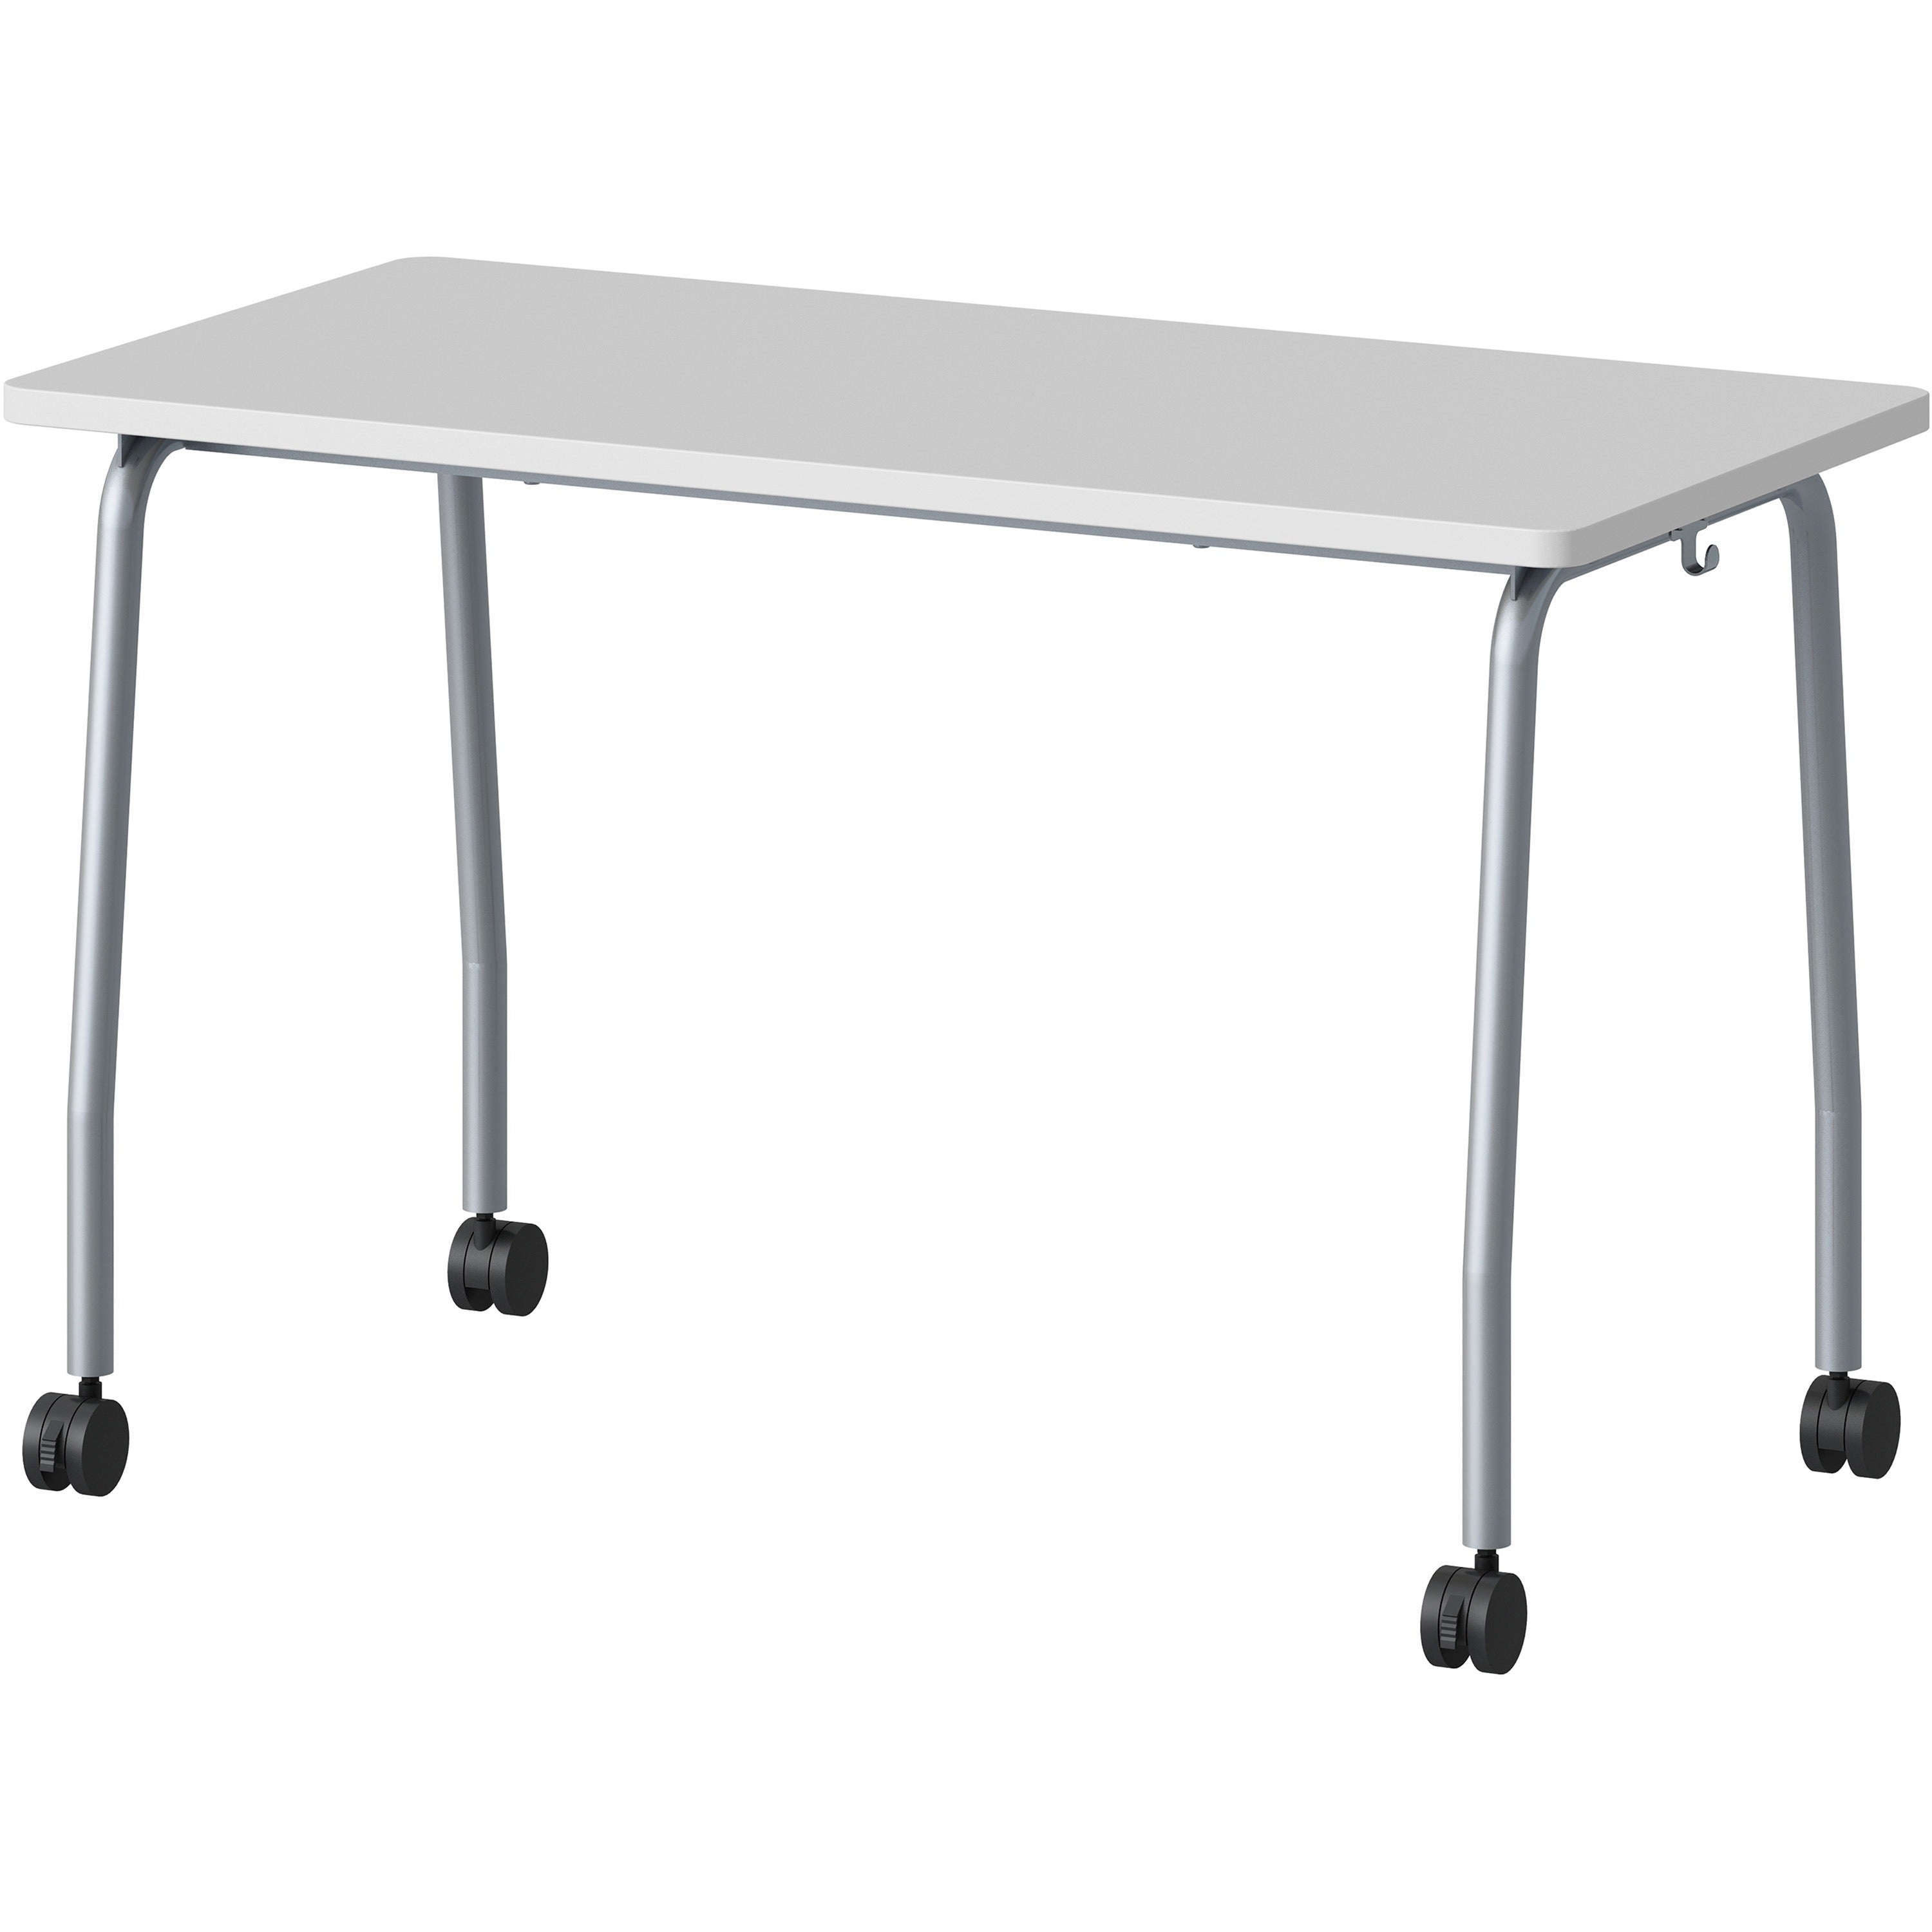 lorell-training-table-for-table-toplaminated-top-300-lb-capacity-2950-table-top-length-x-2363-table-top-width-x-1-table-top-thickness-4725-height-assembly-required-gray-particleboard-top-material-1-each_llr60847 - 4